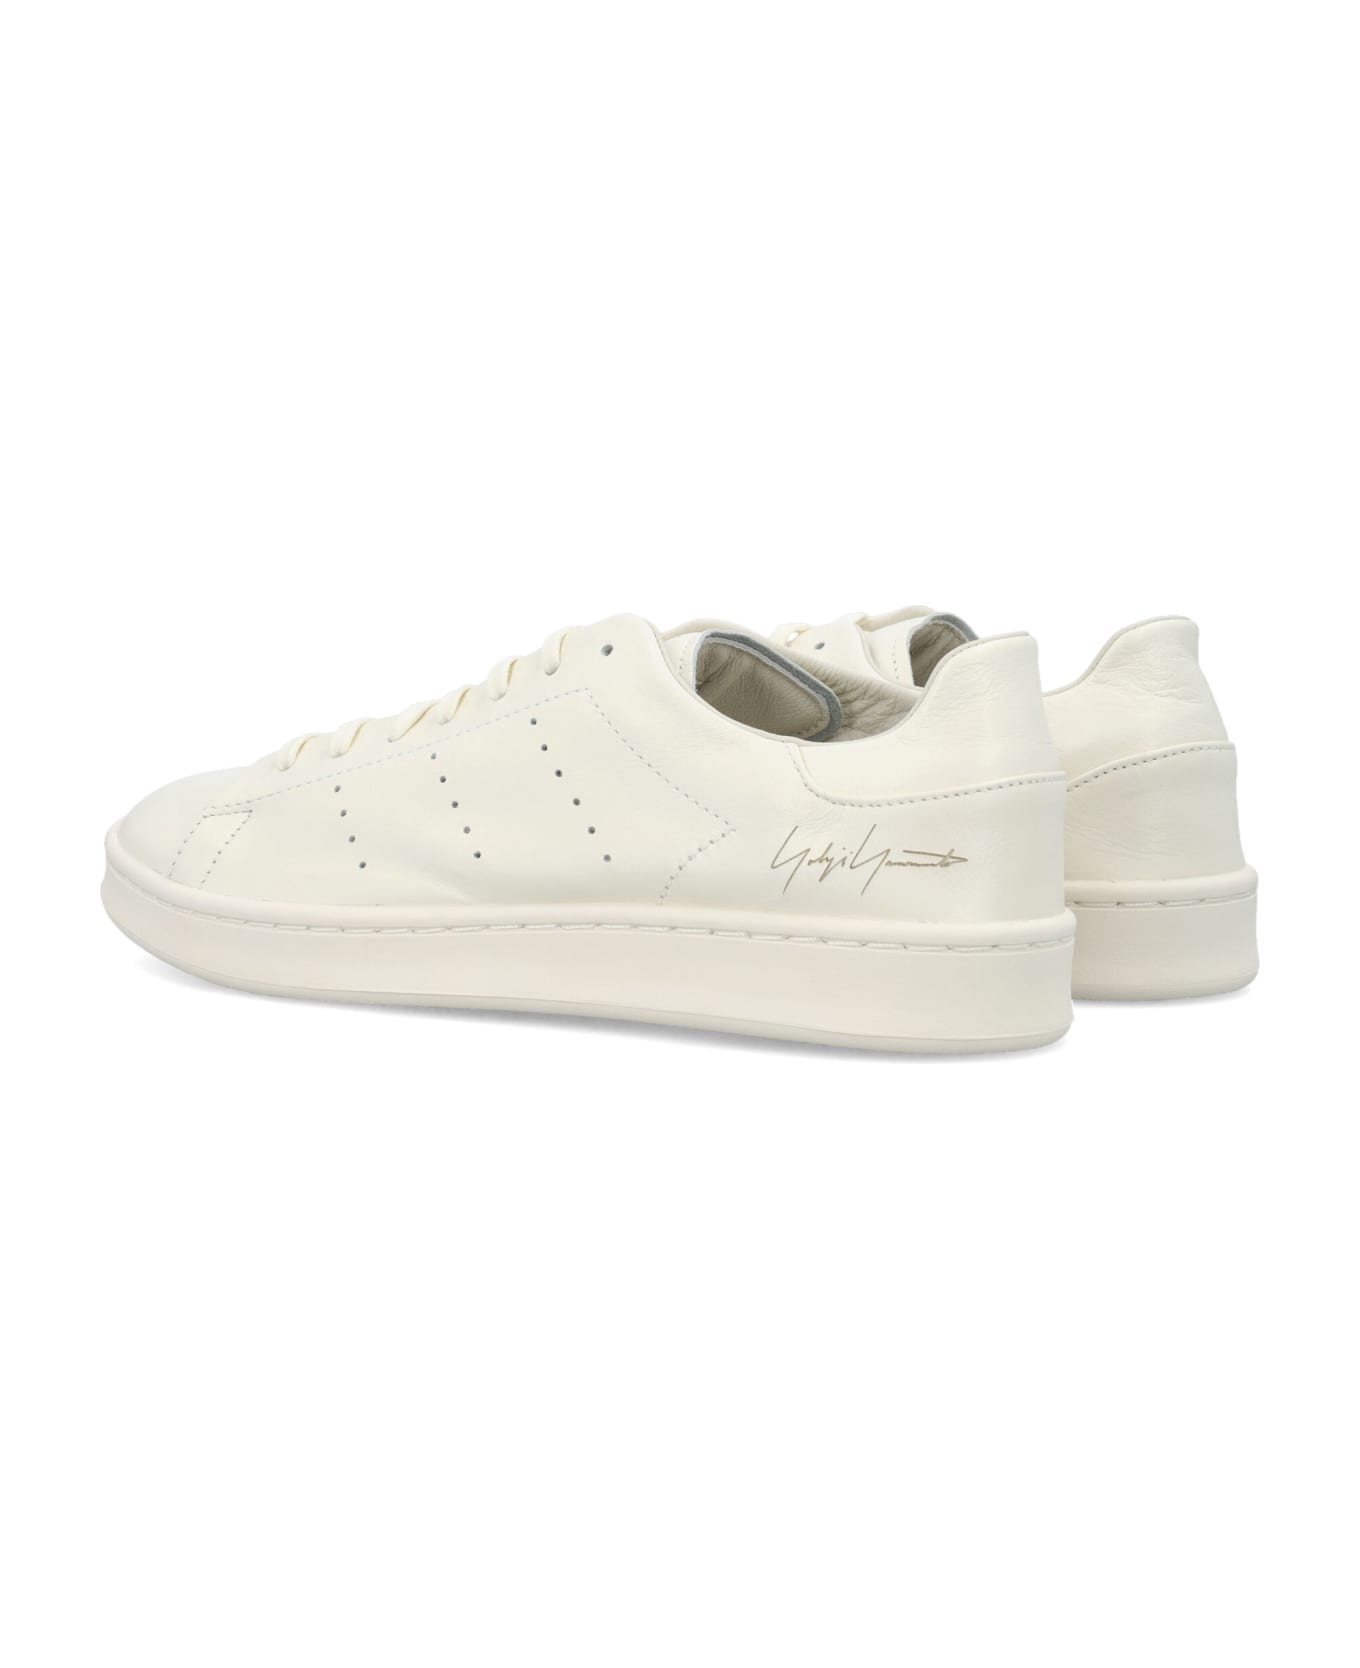 Y-3 Stan Smith Sneakers - WHITE スニーカー